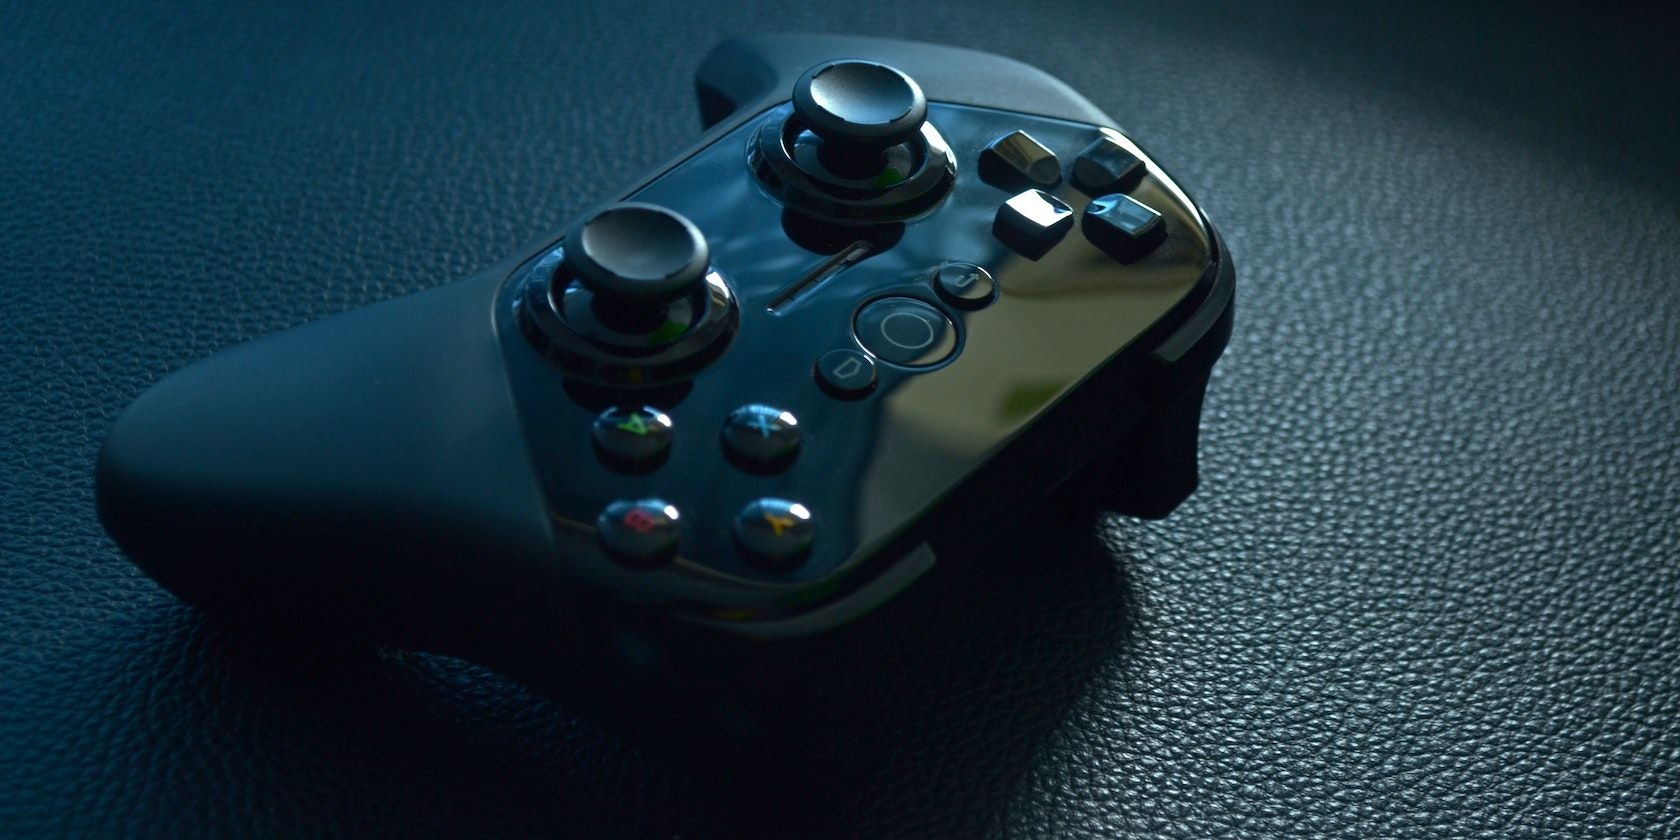 Wireless game controller on black leather